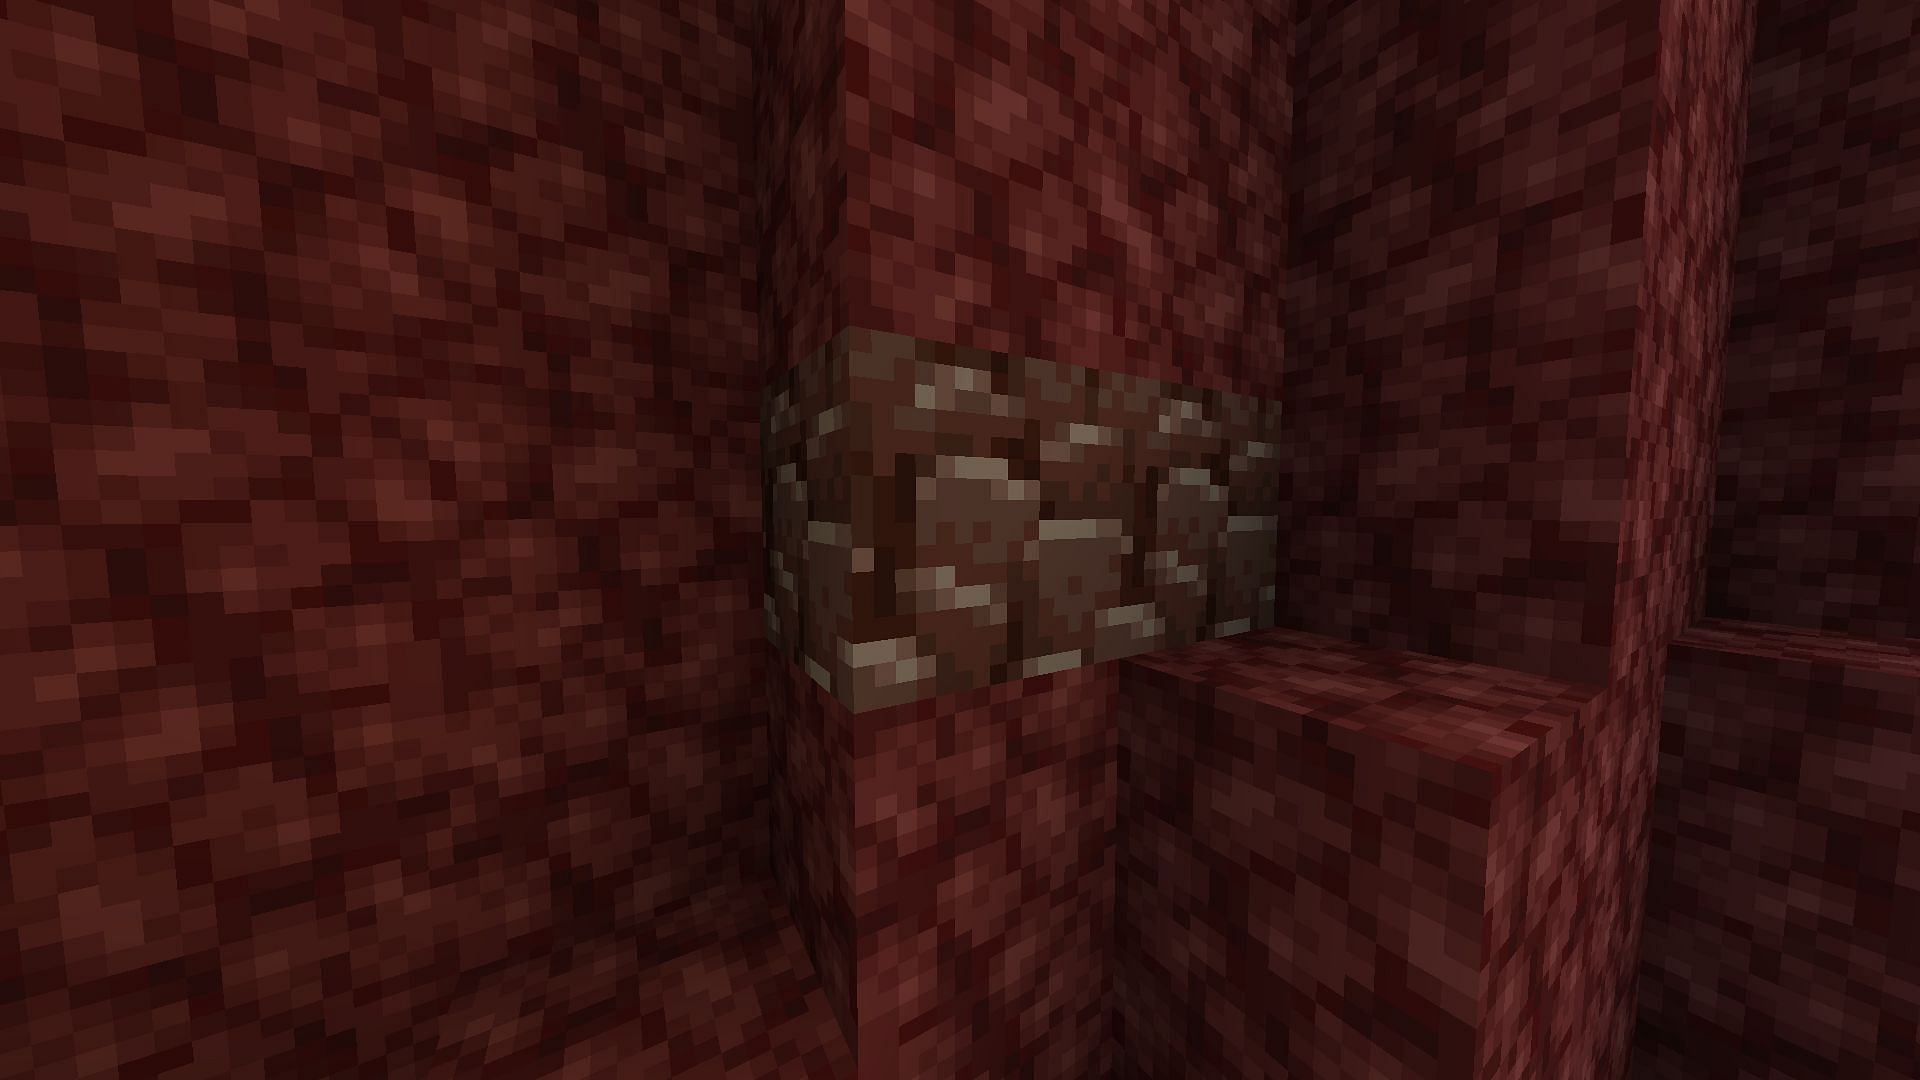 Netherite can be extracted and used from Ancient Debris in Minecraft (Image via Mojang)